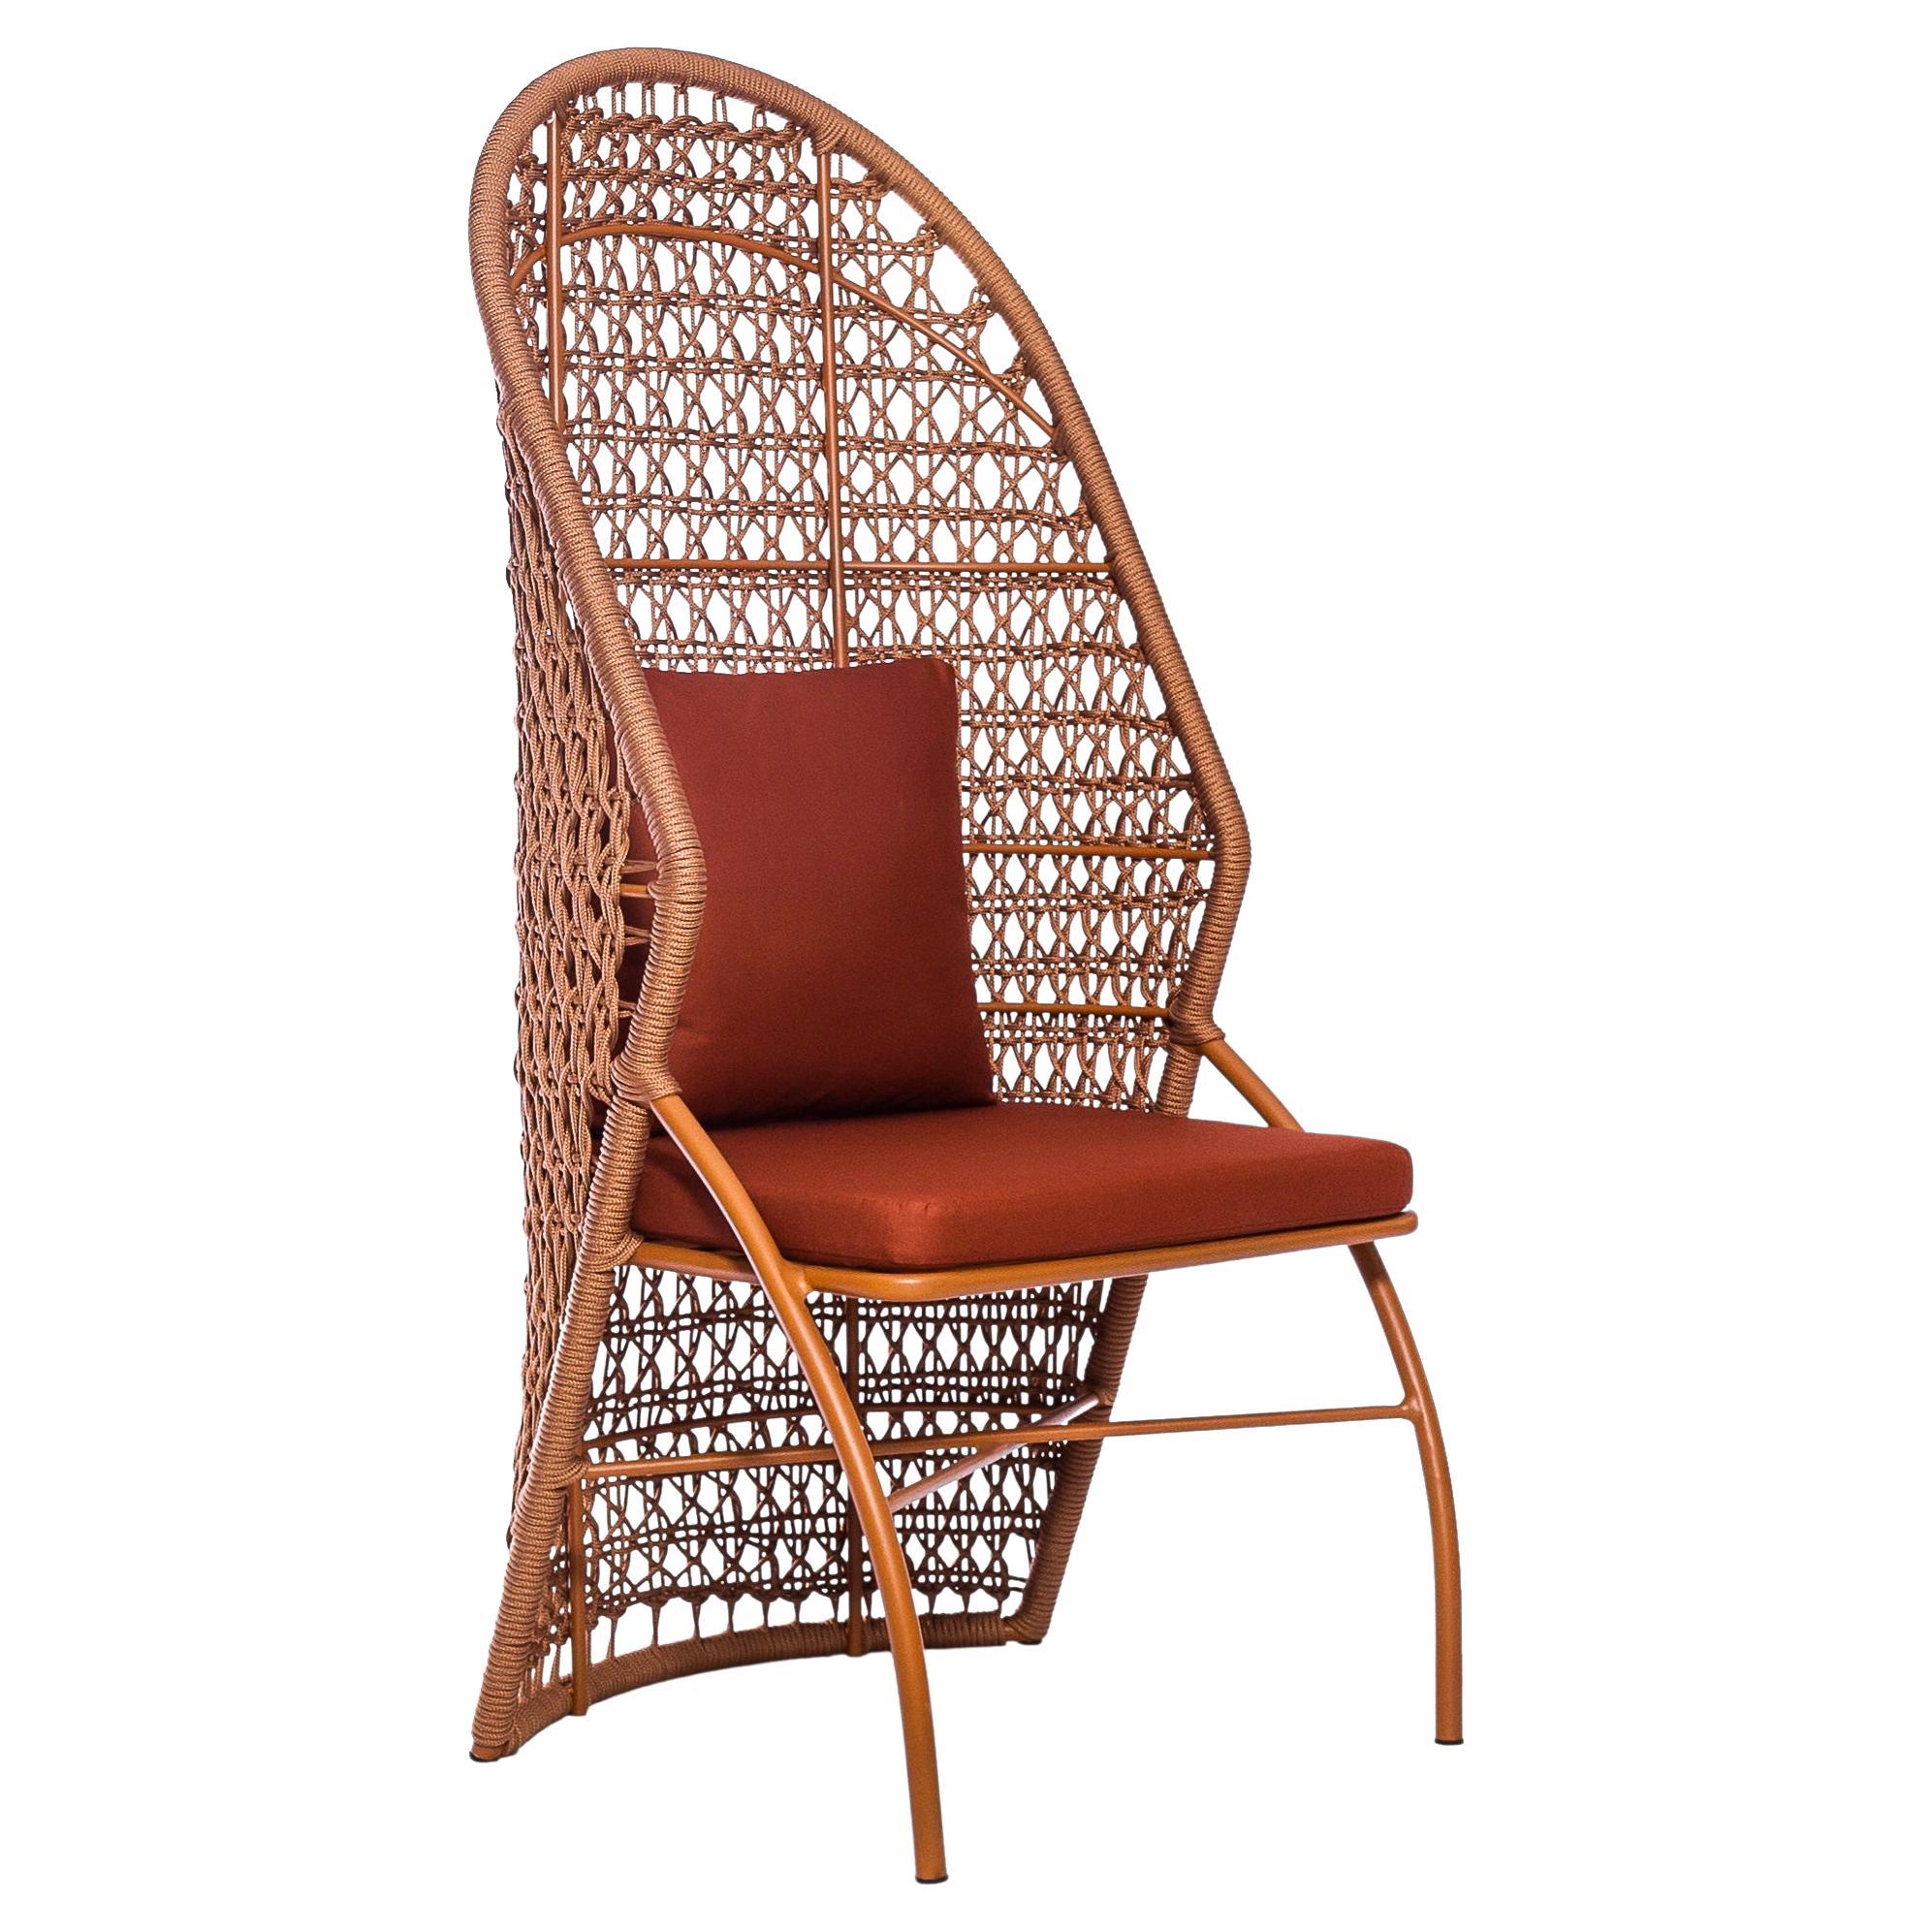 "Belize" Outdoor Chair in Aluminum and Naval Rope Handmade For Sale